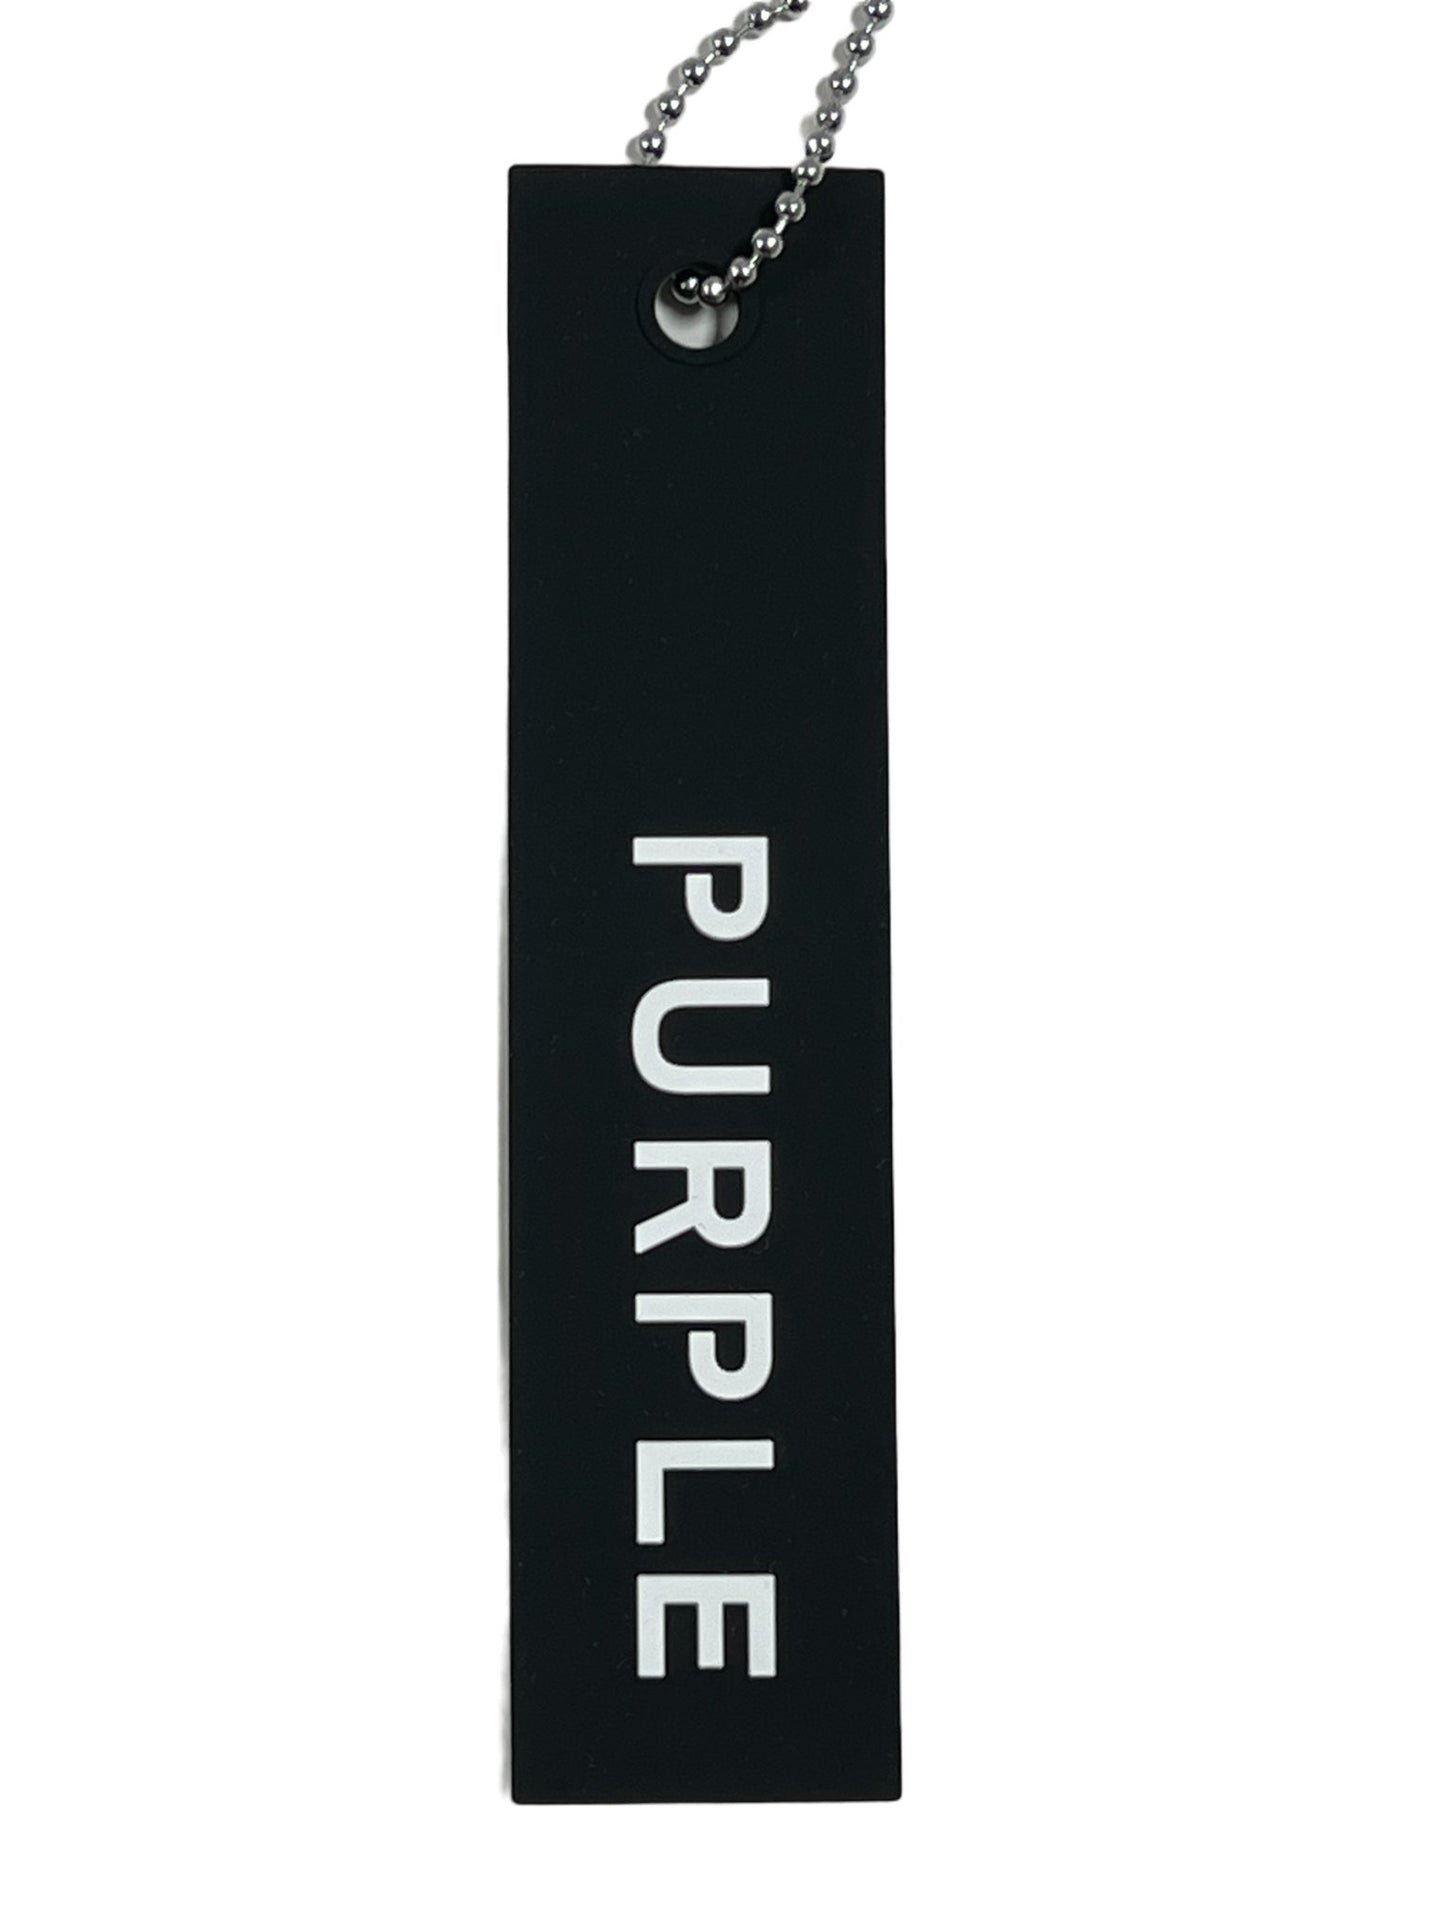 A black keychain tag with the text "PURPLE" in white, attached to a silver ball chain, reflecting the vibrant print and unique design of PURPLE BRAND P504-PGPM ALL ROUND SHORT AOP swim trunks by PURPLE BRAND.